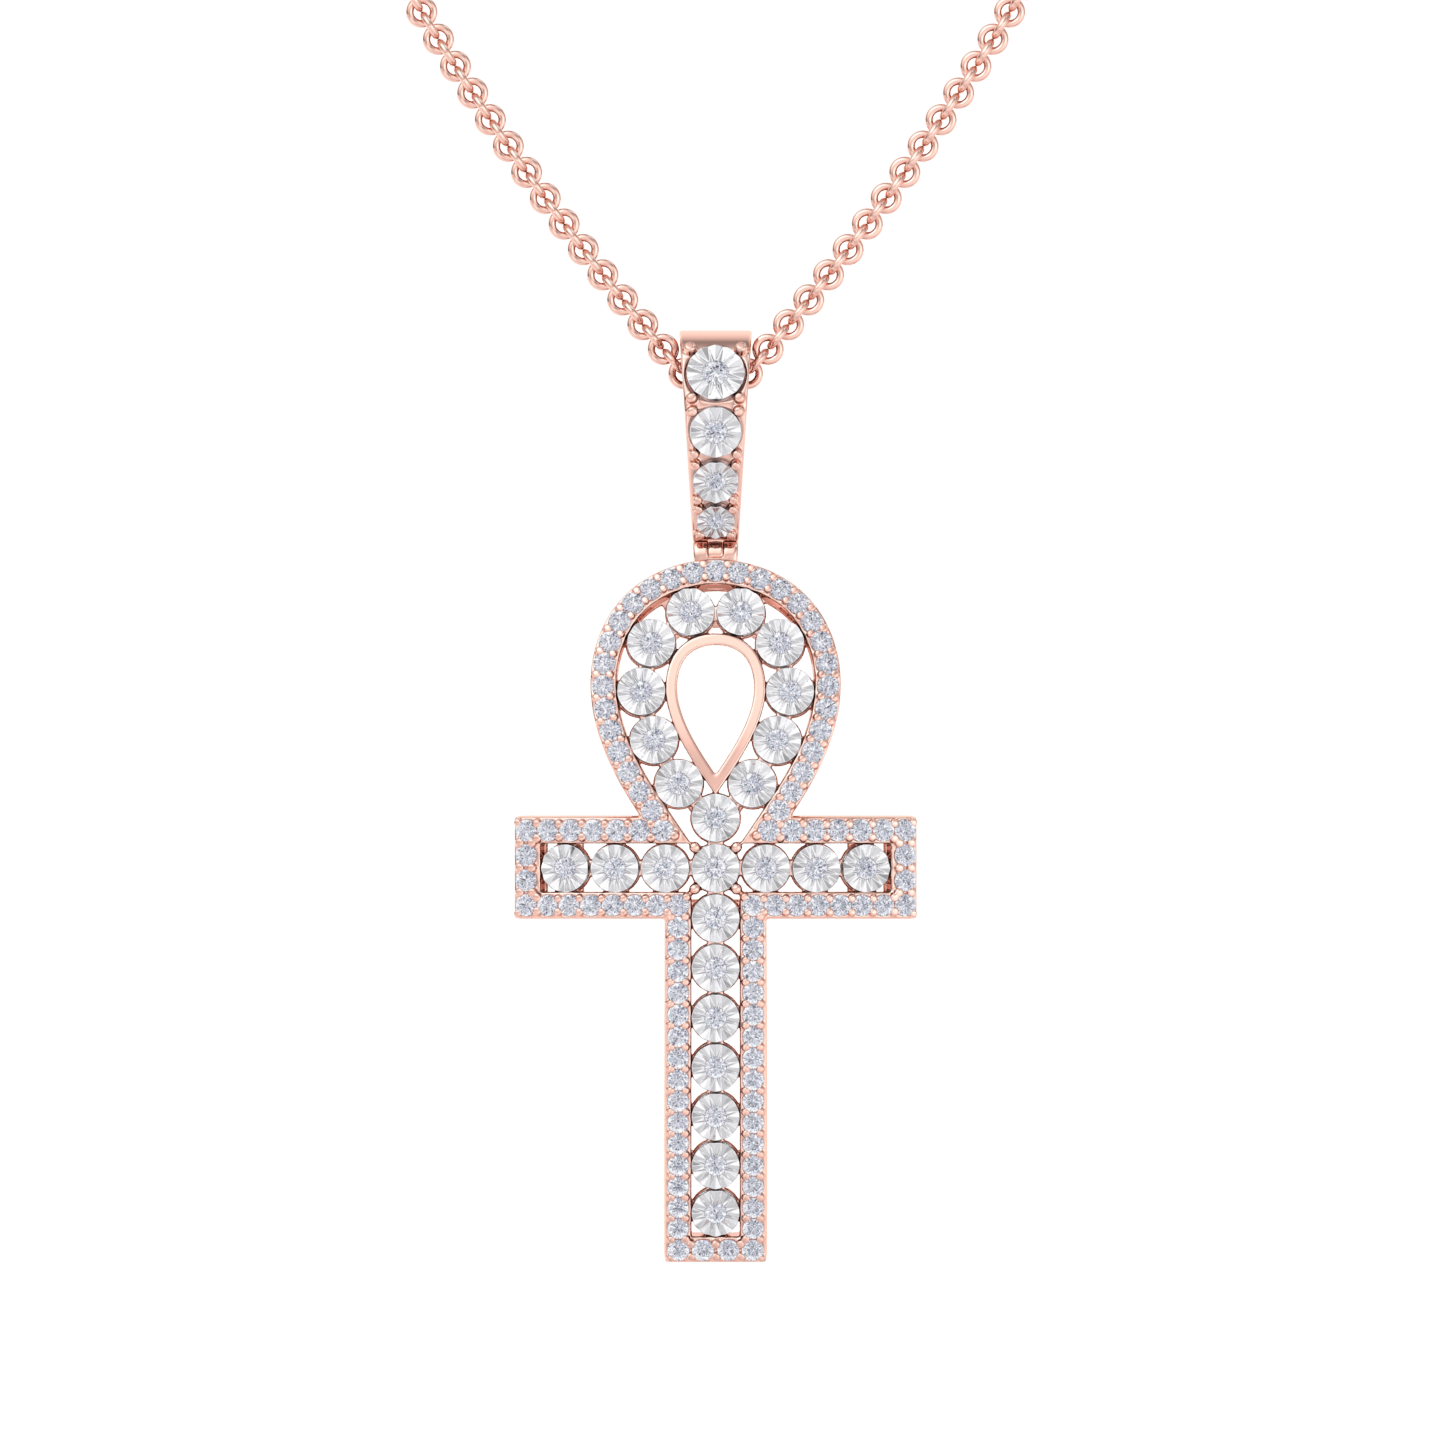 Ankh pendant in rose gold with white diamonds of 1.77 ct in weight